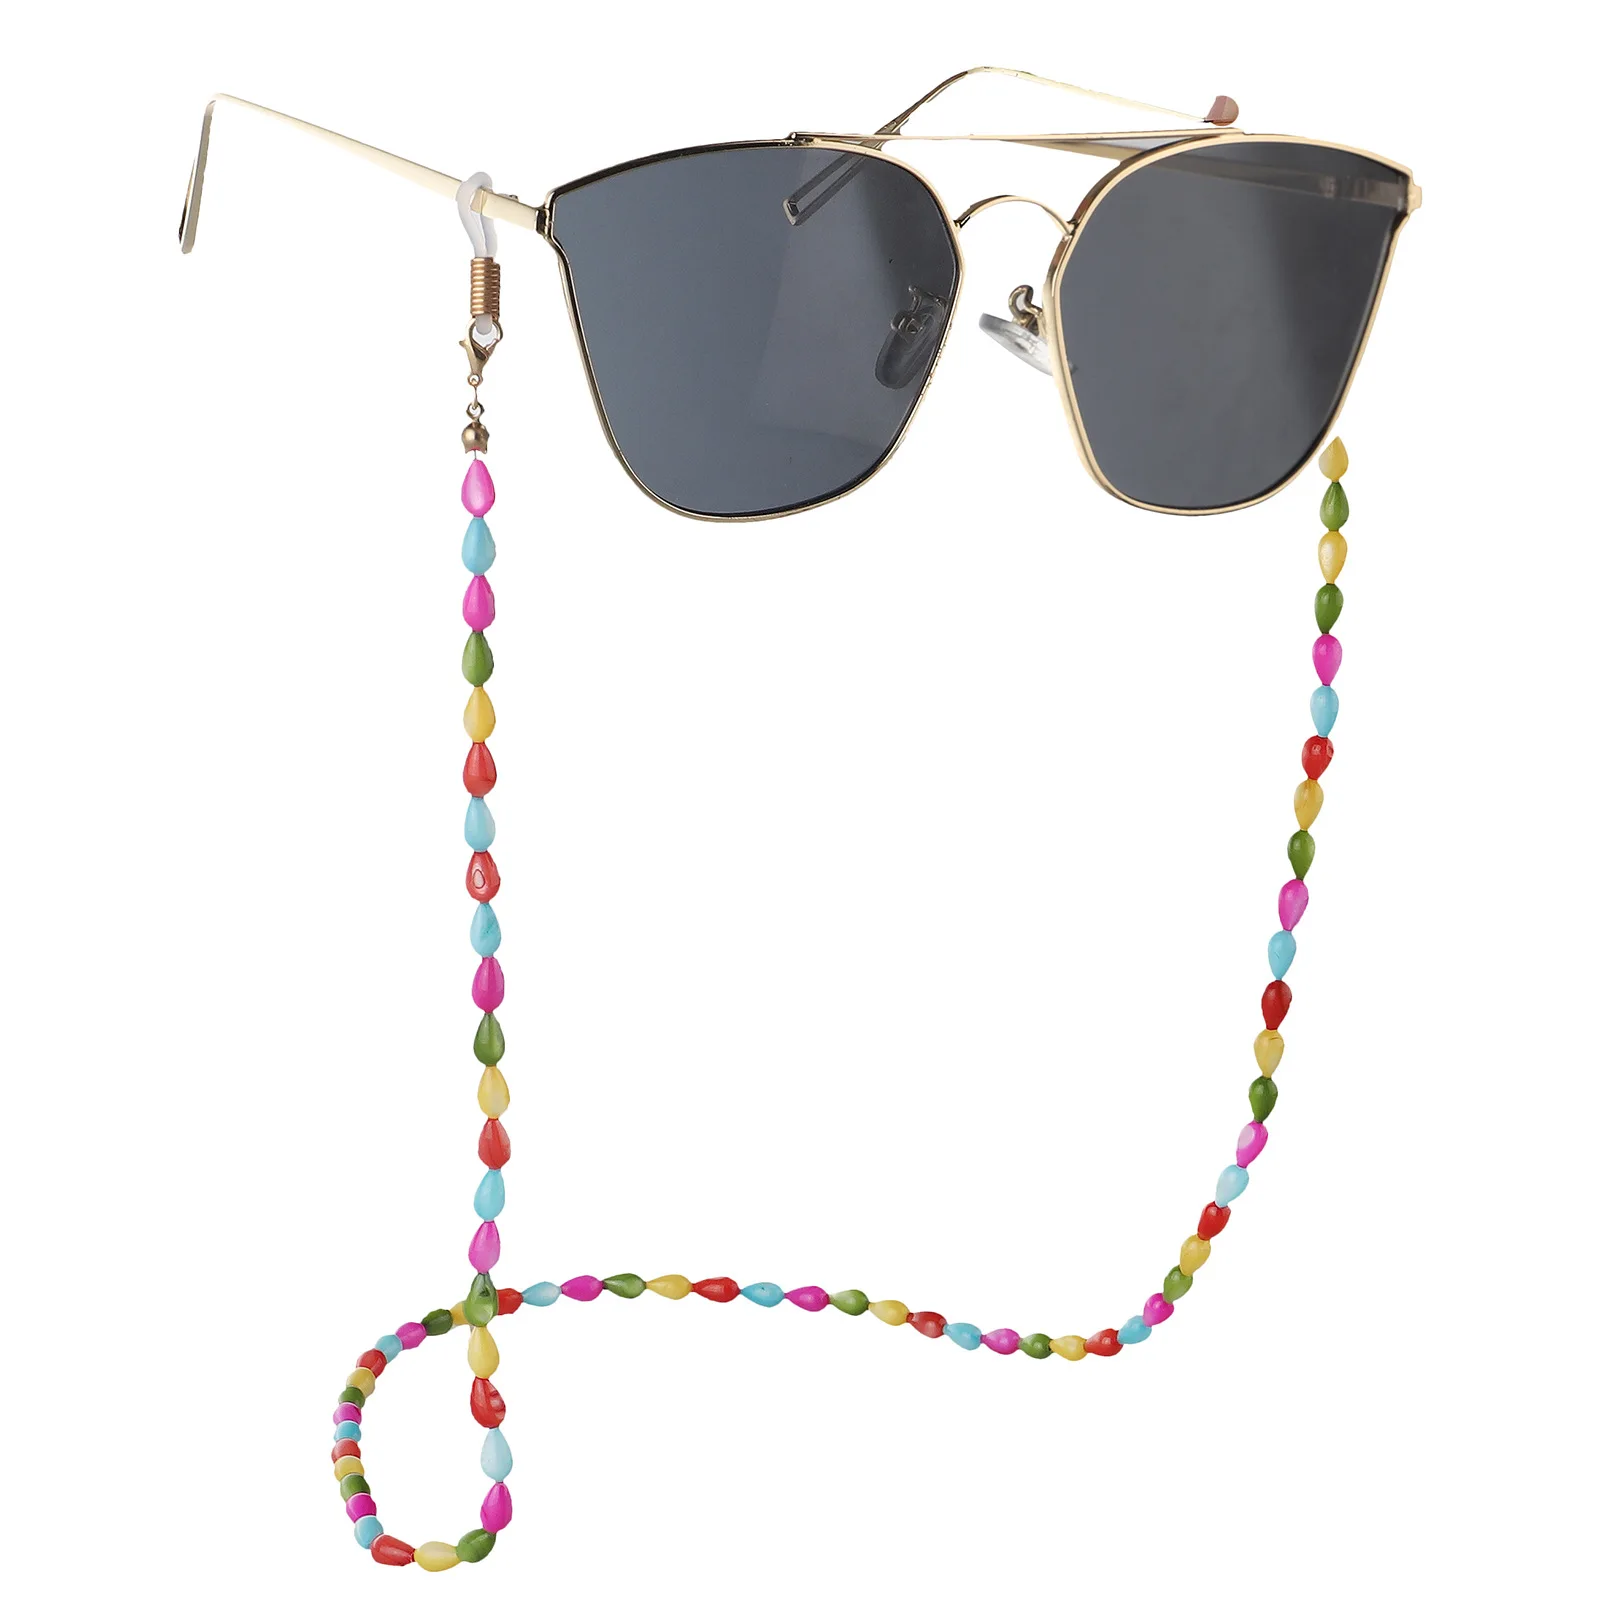 Details about   Chic Colorful Beads Chain Glasses Women Eyewear Chain Lanyard Necklace Reatiner